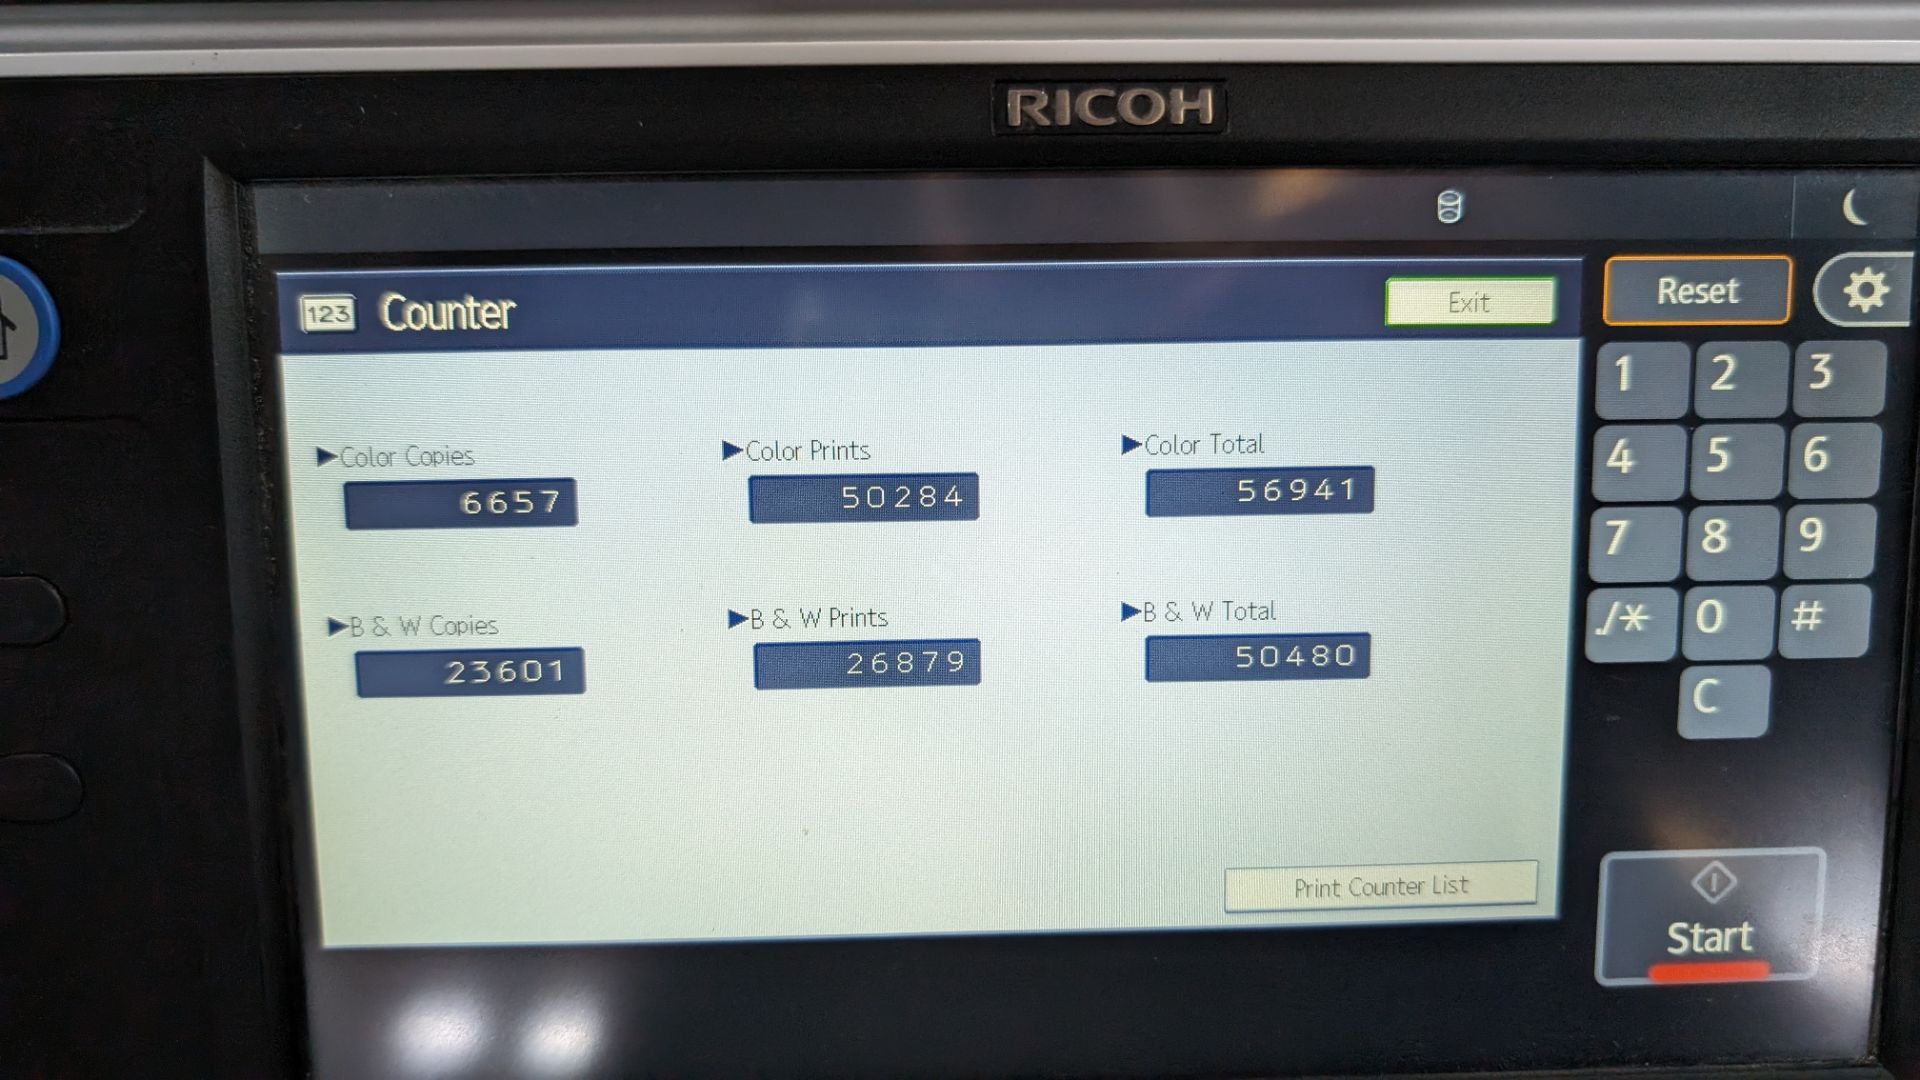 Ricoh MP C3003 floor standing copier with touchscreen controls, ADF, twin paper cassettes & more - Image 8 of 18